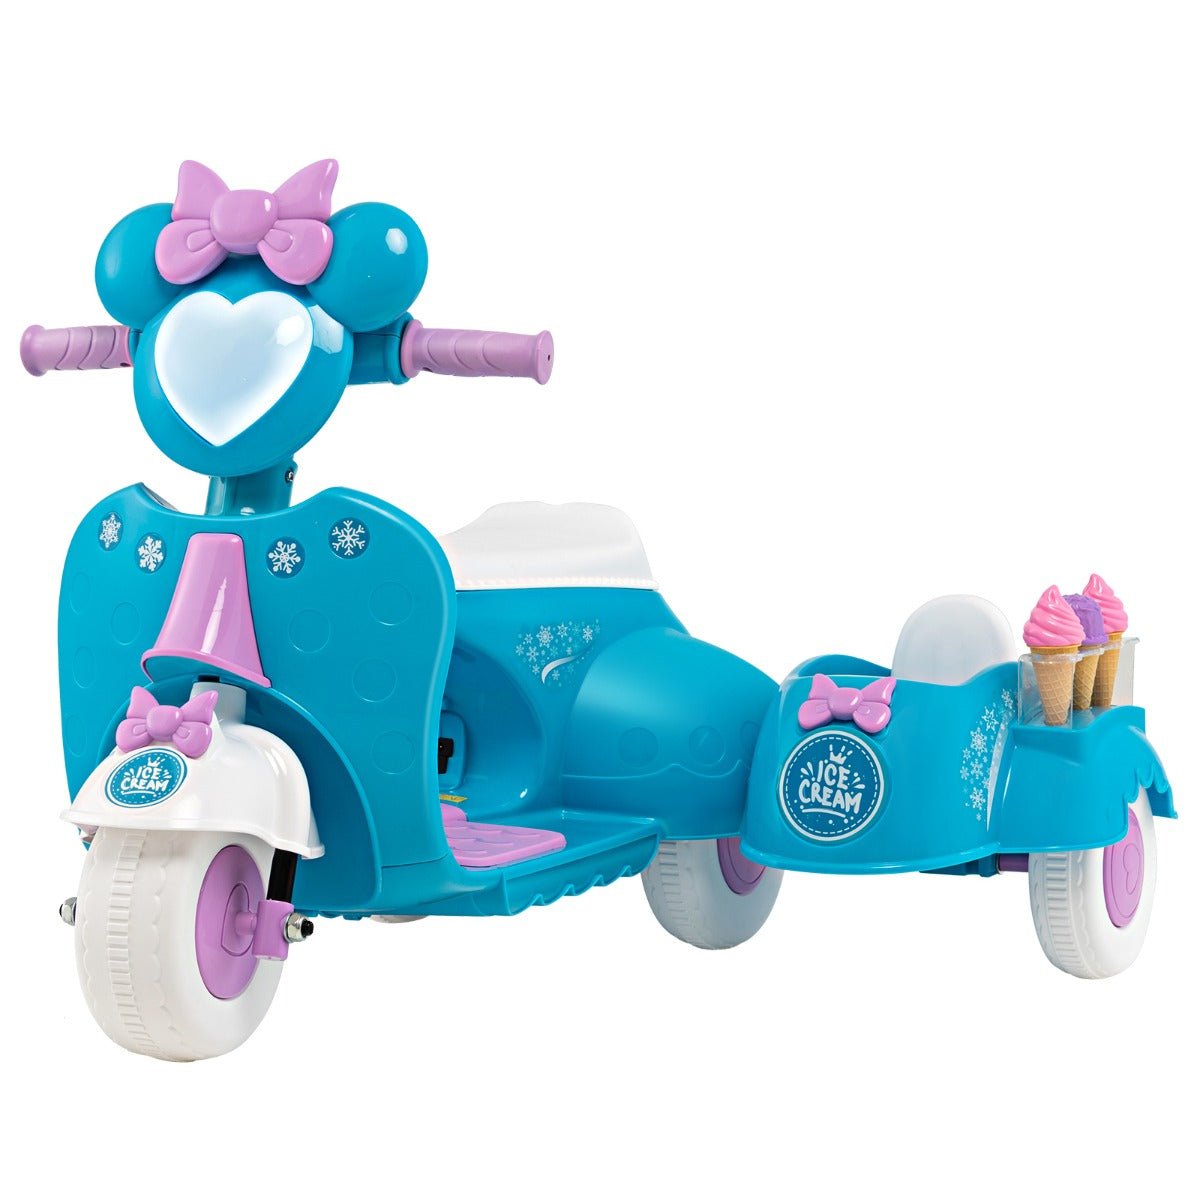 Blue Kids Ride-On Motorbike with Removable Sidecar: Adventure Awaits